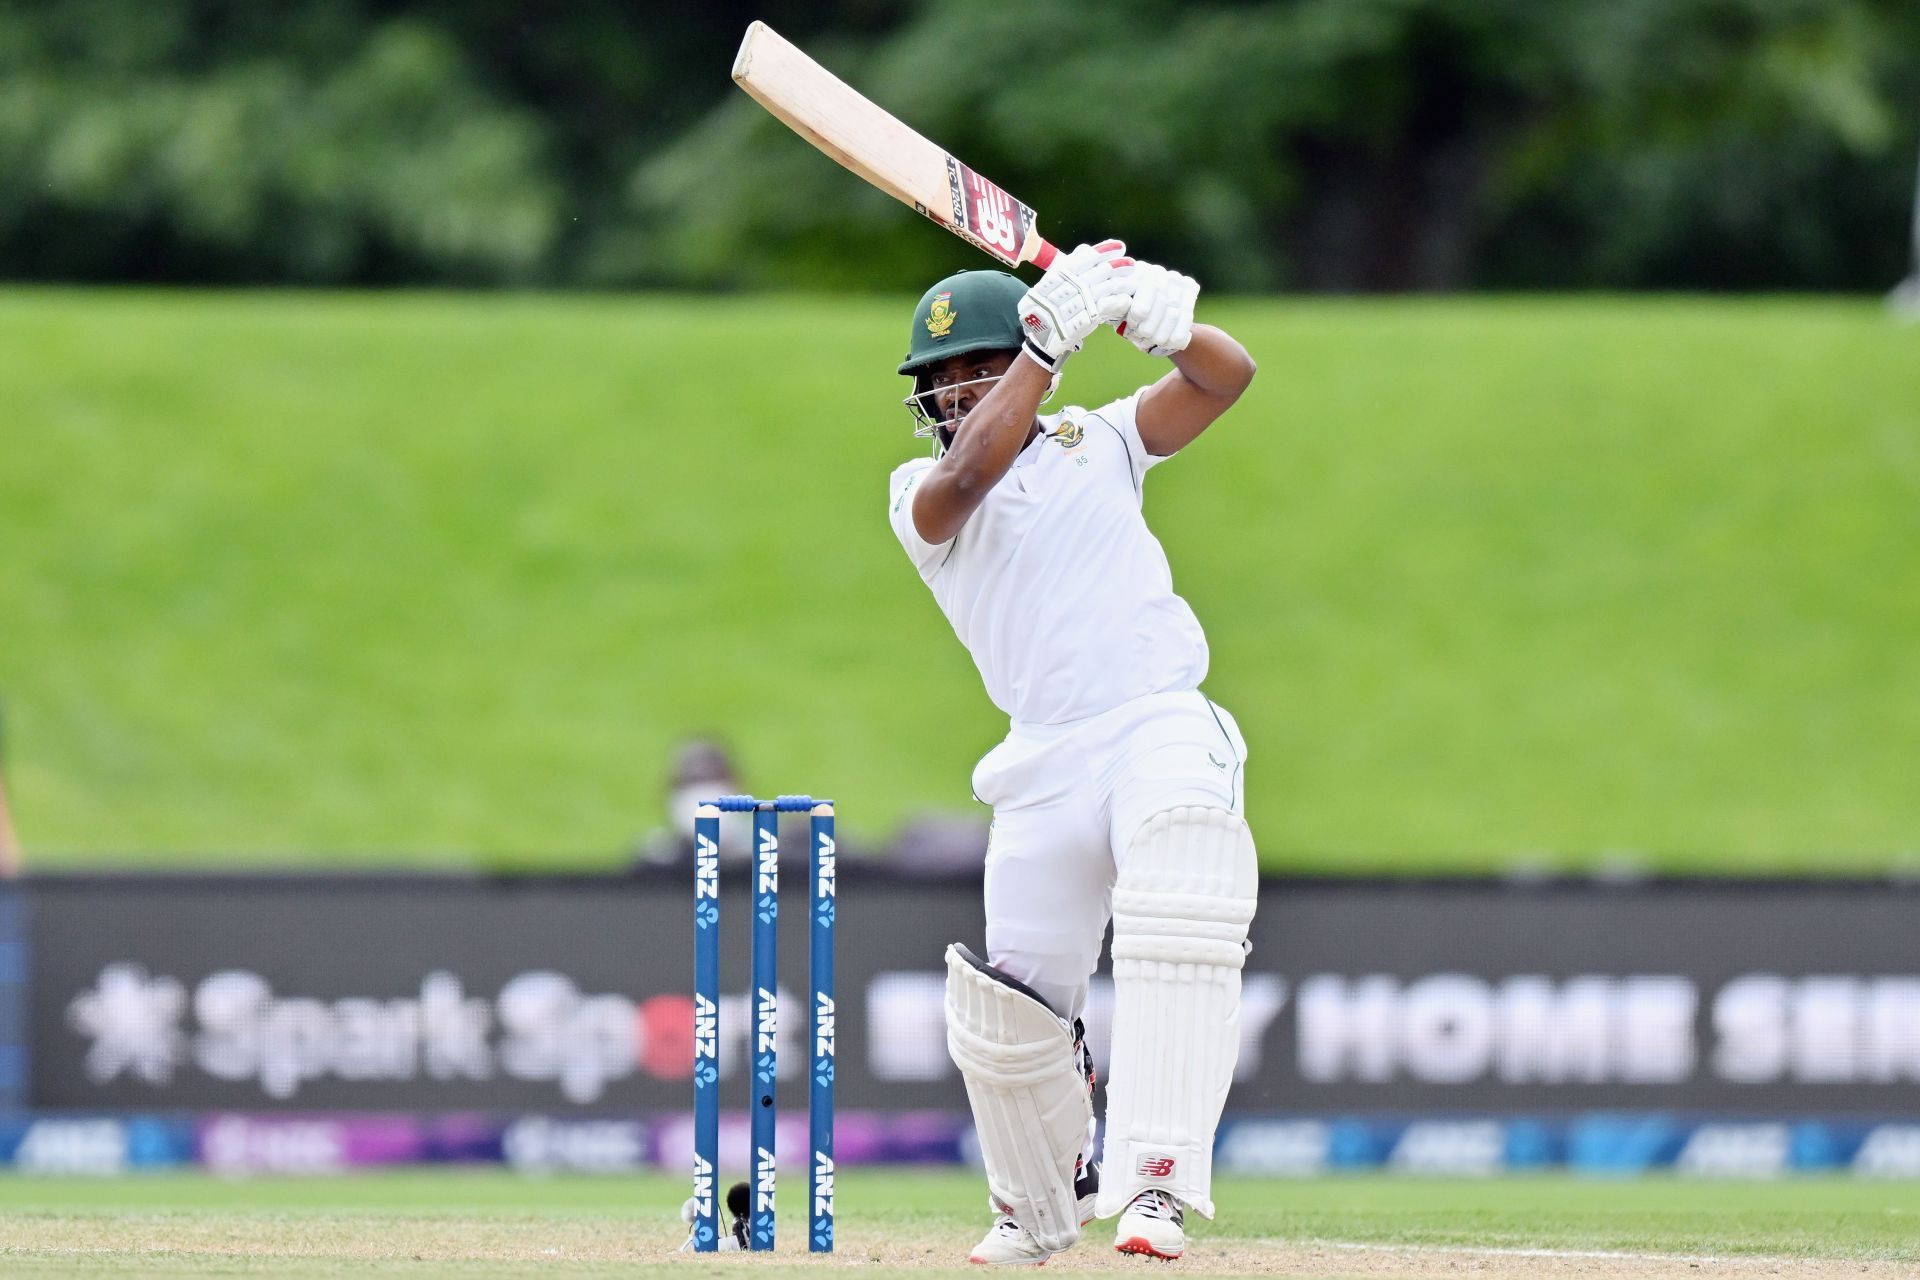 Temba Bavuma has been consistent without being outstanding